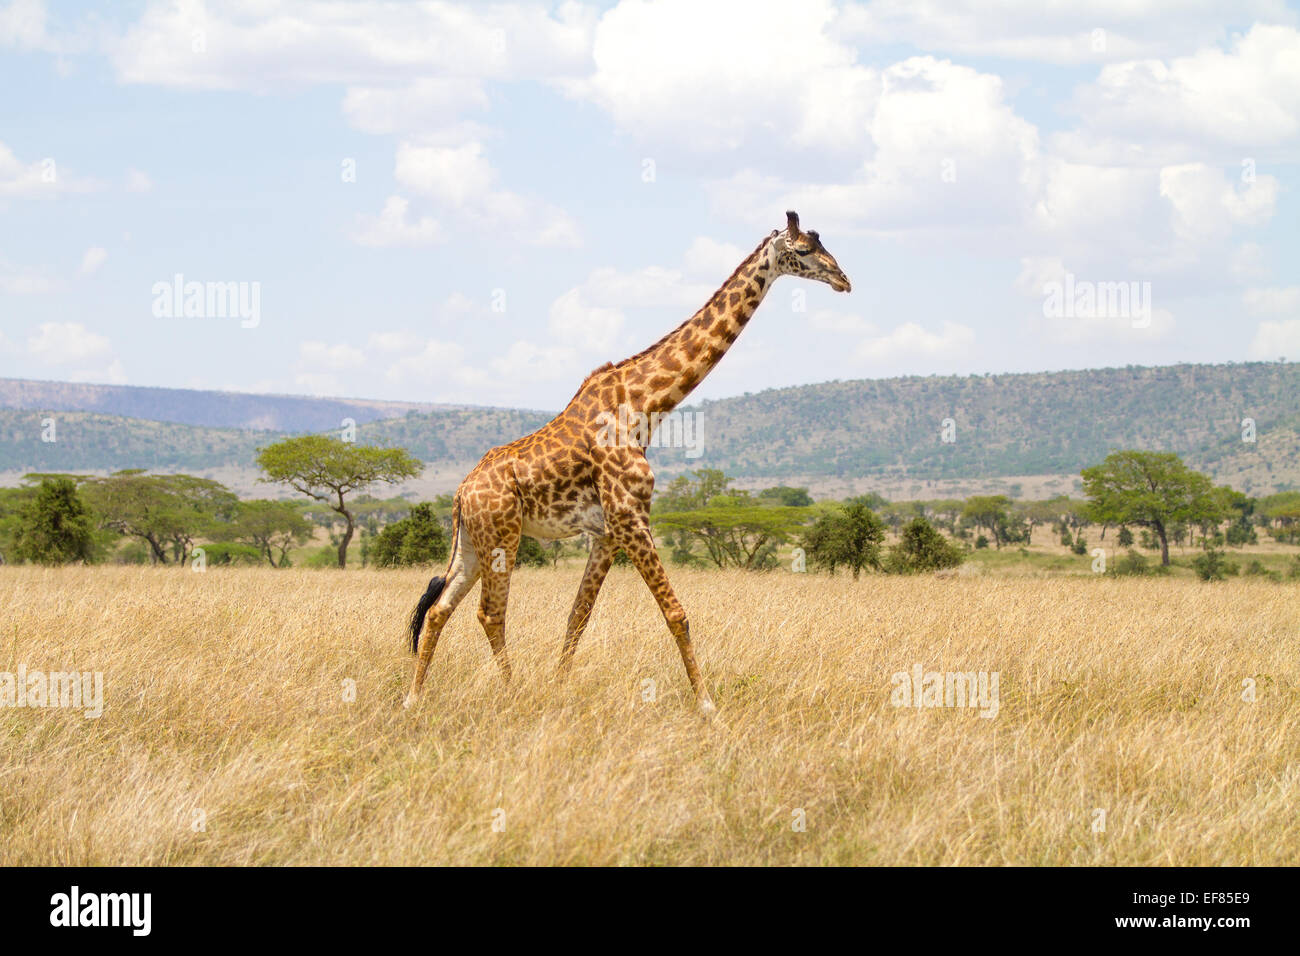 Large giraffe walks at the plains of Africa Stock Photo